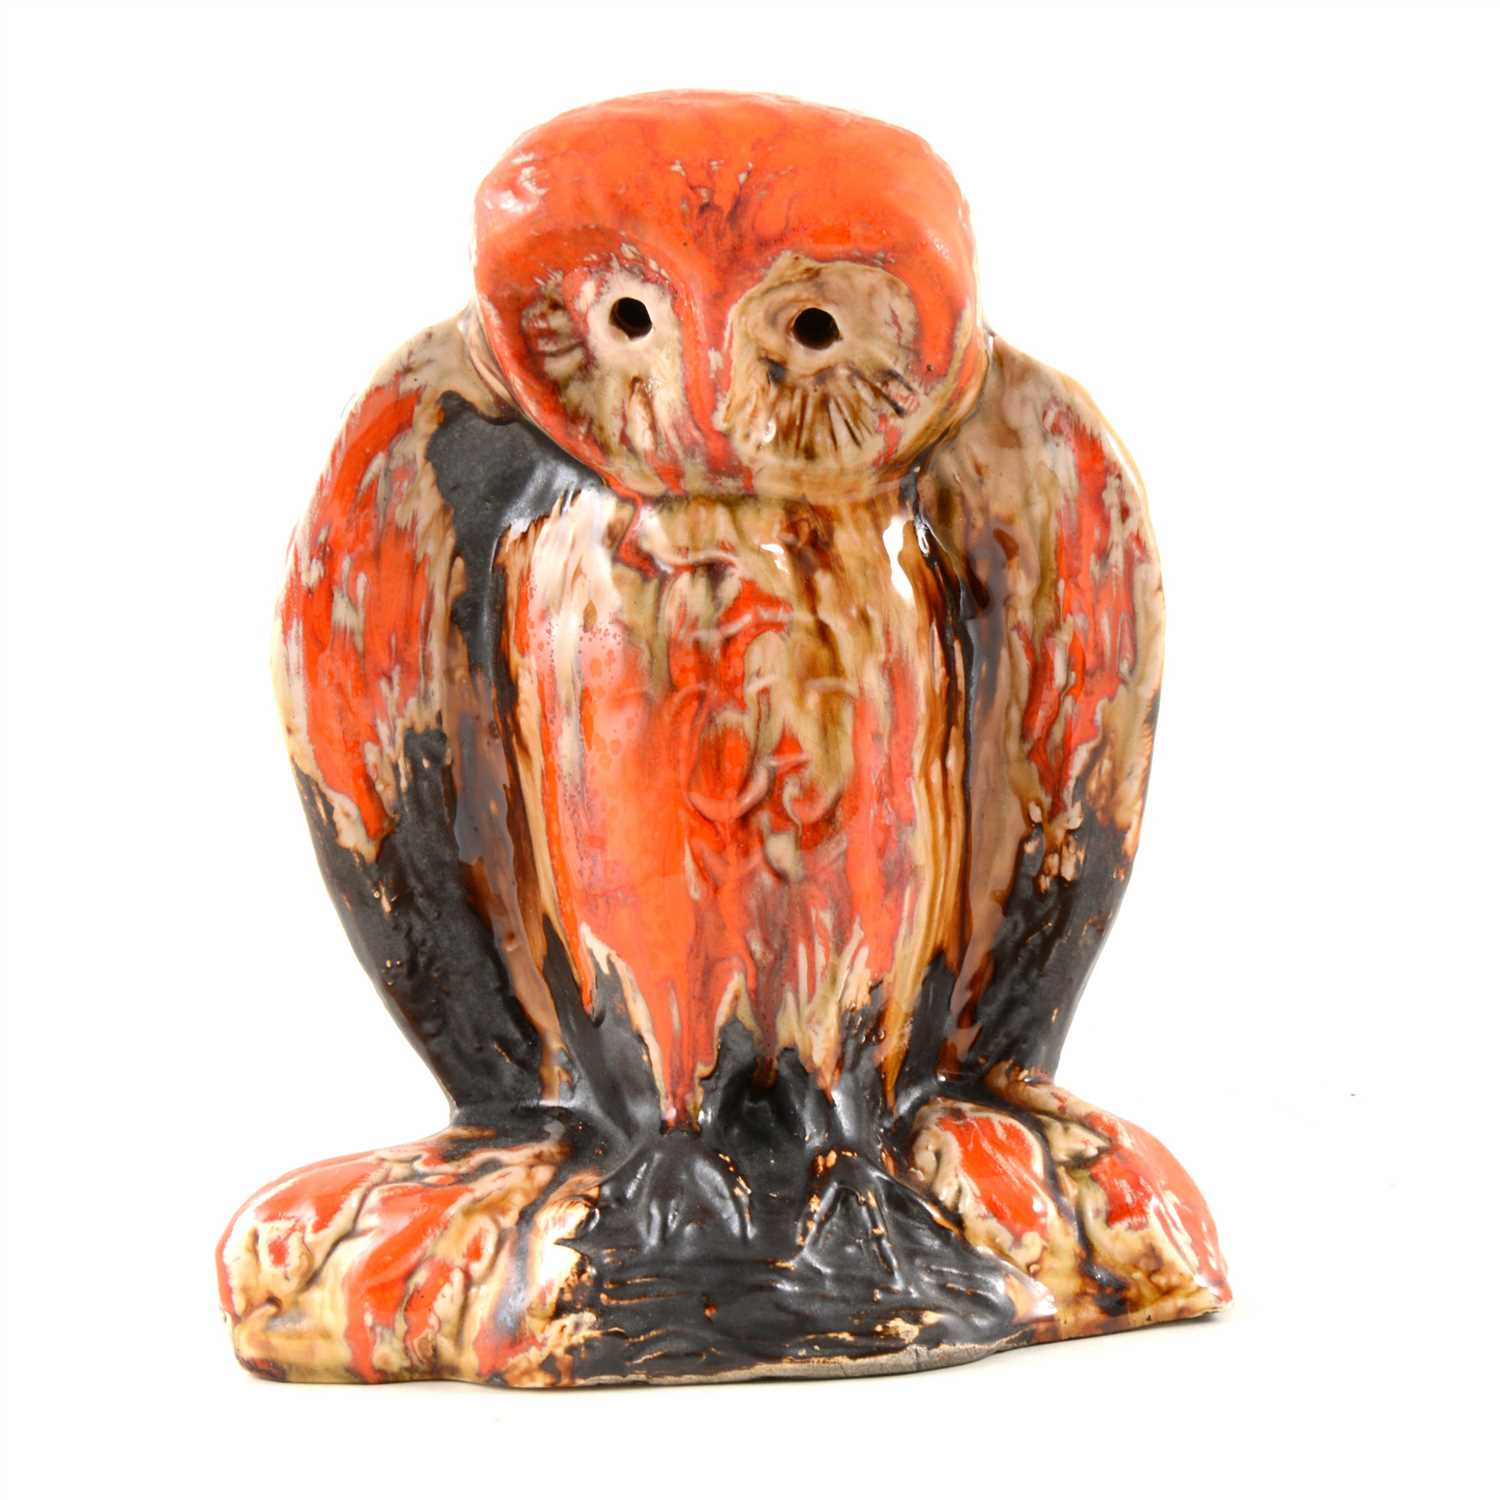 Lot 4 - Eric Leaper, a large pottery model of an owl on a branch, running burnished orange glaze over a manganese body, 25.5cm high